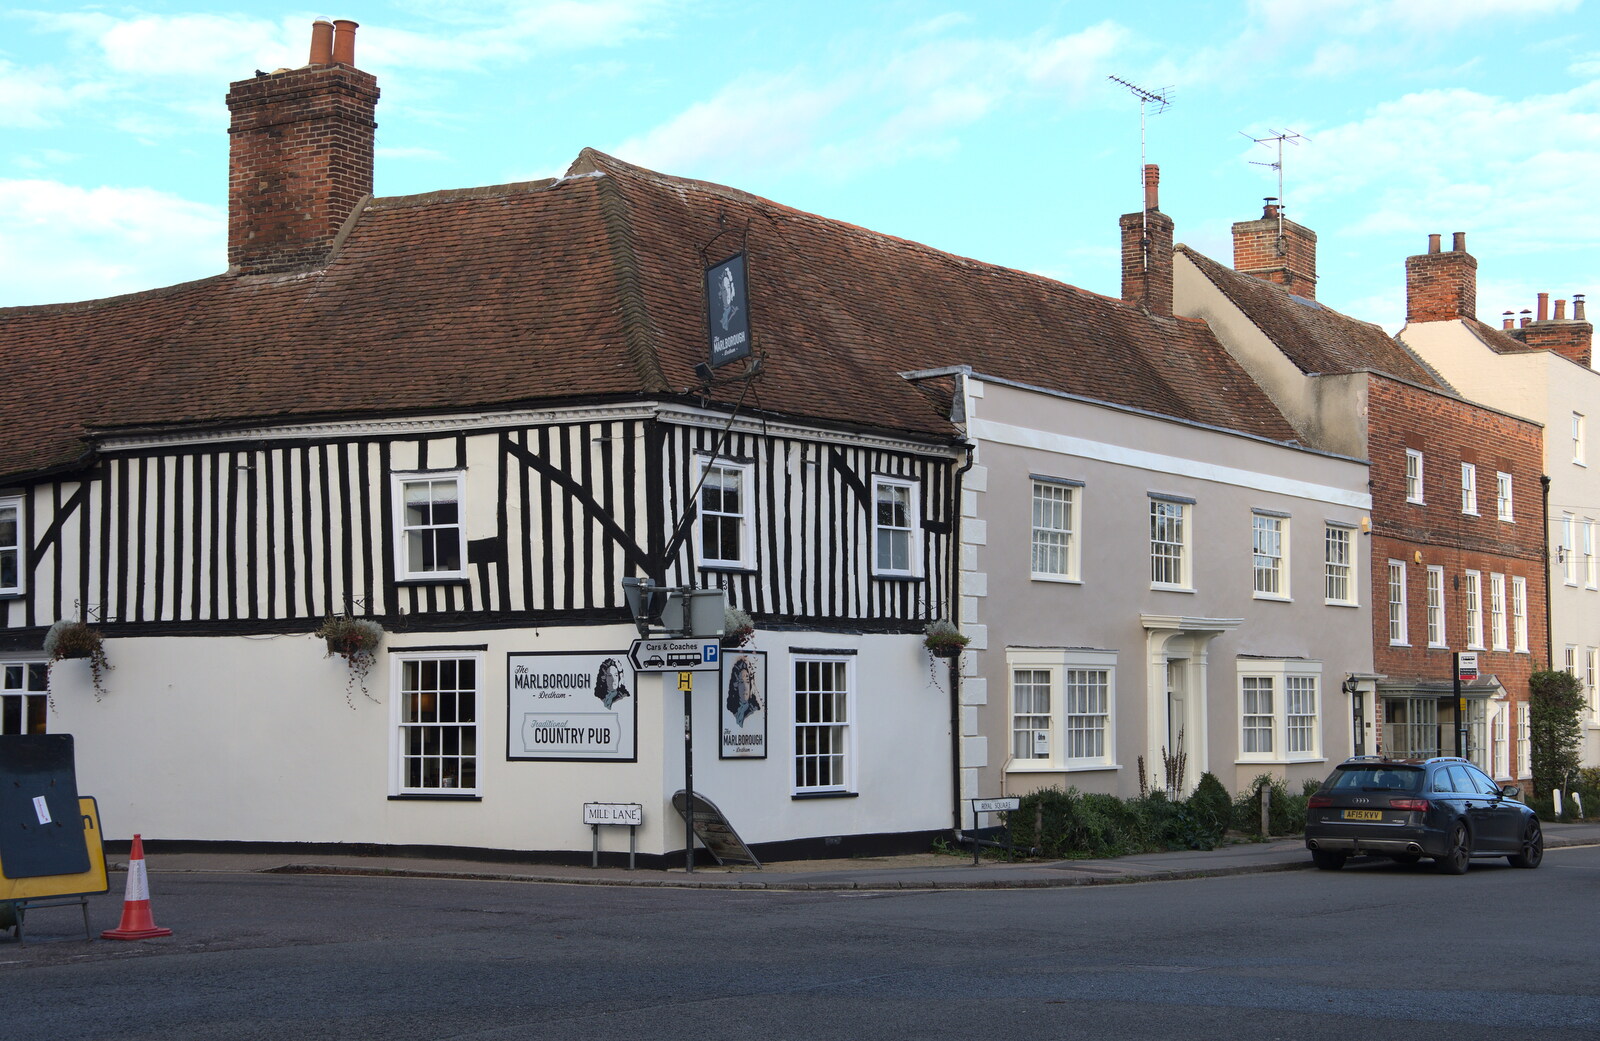 A Postcard from Flatford and Dedham, Suffolk and Essex, 9th November 2022: The Marlborough - our lunch stop